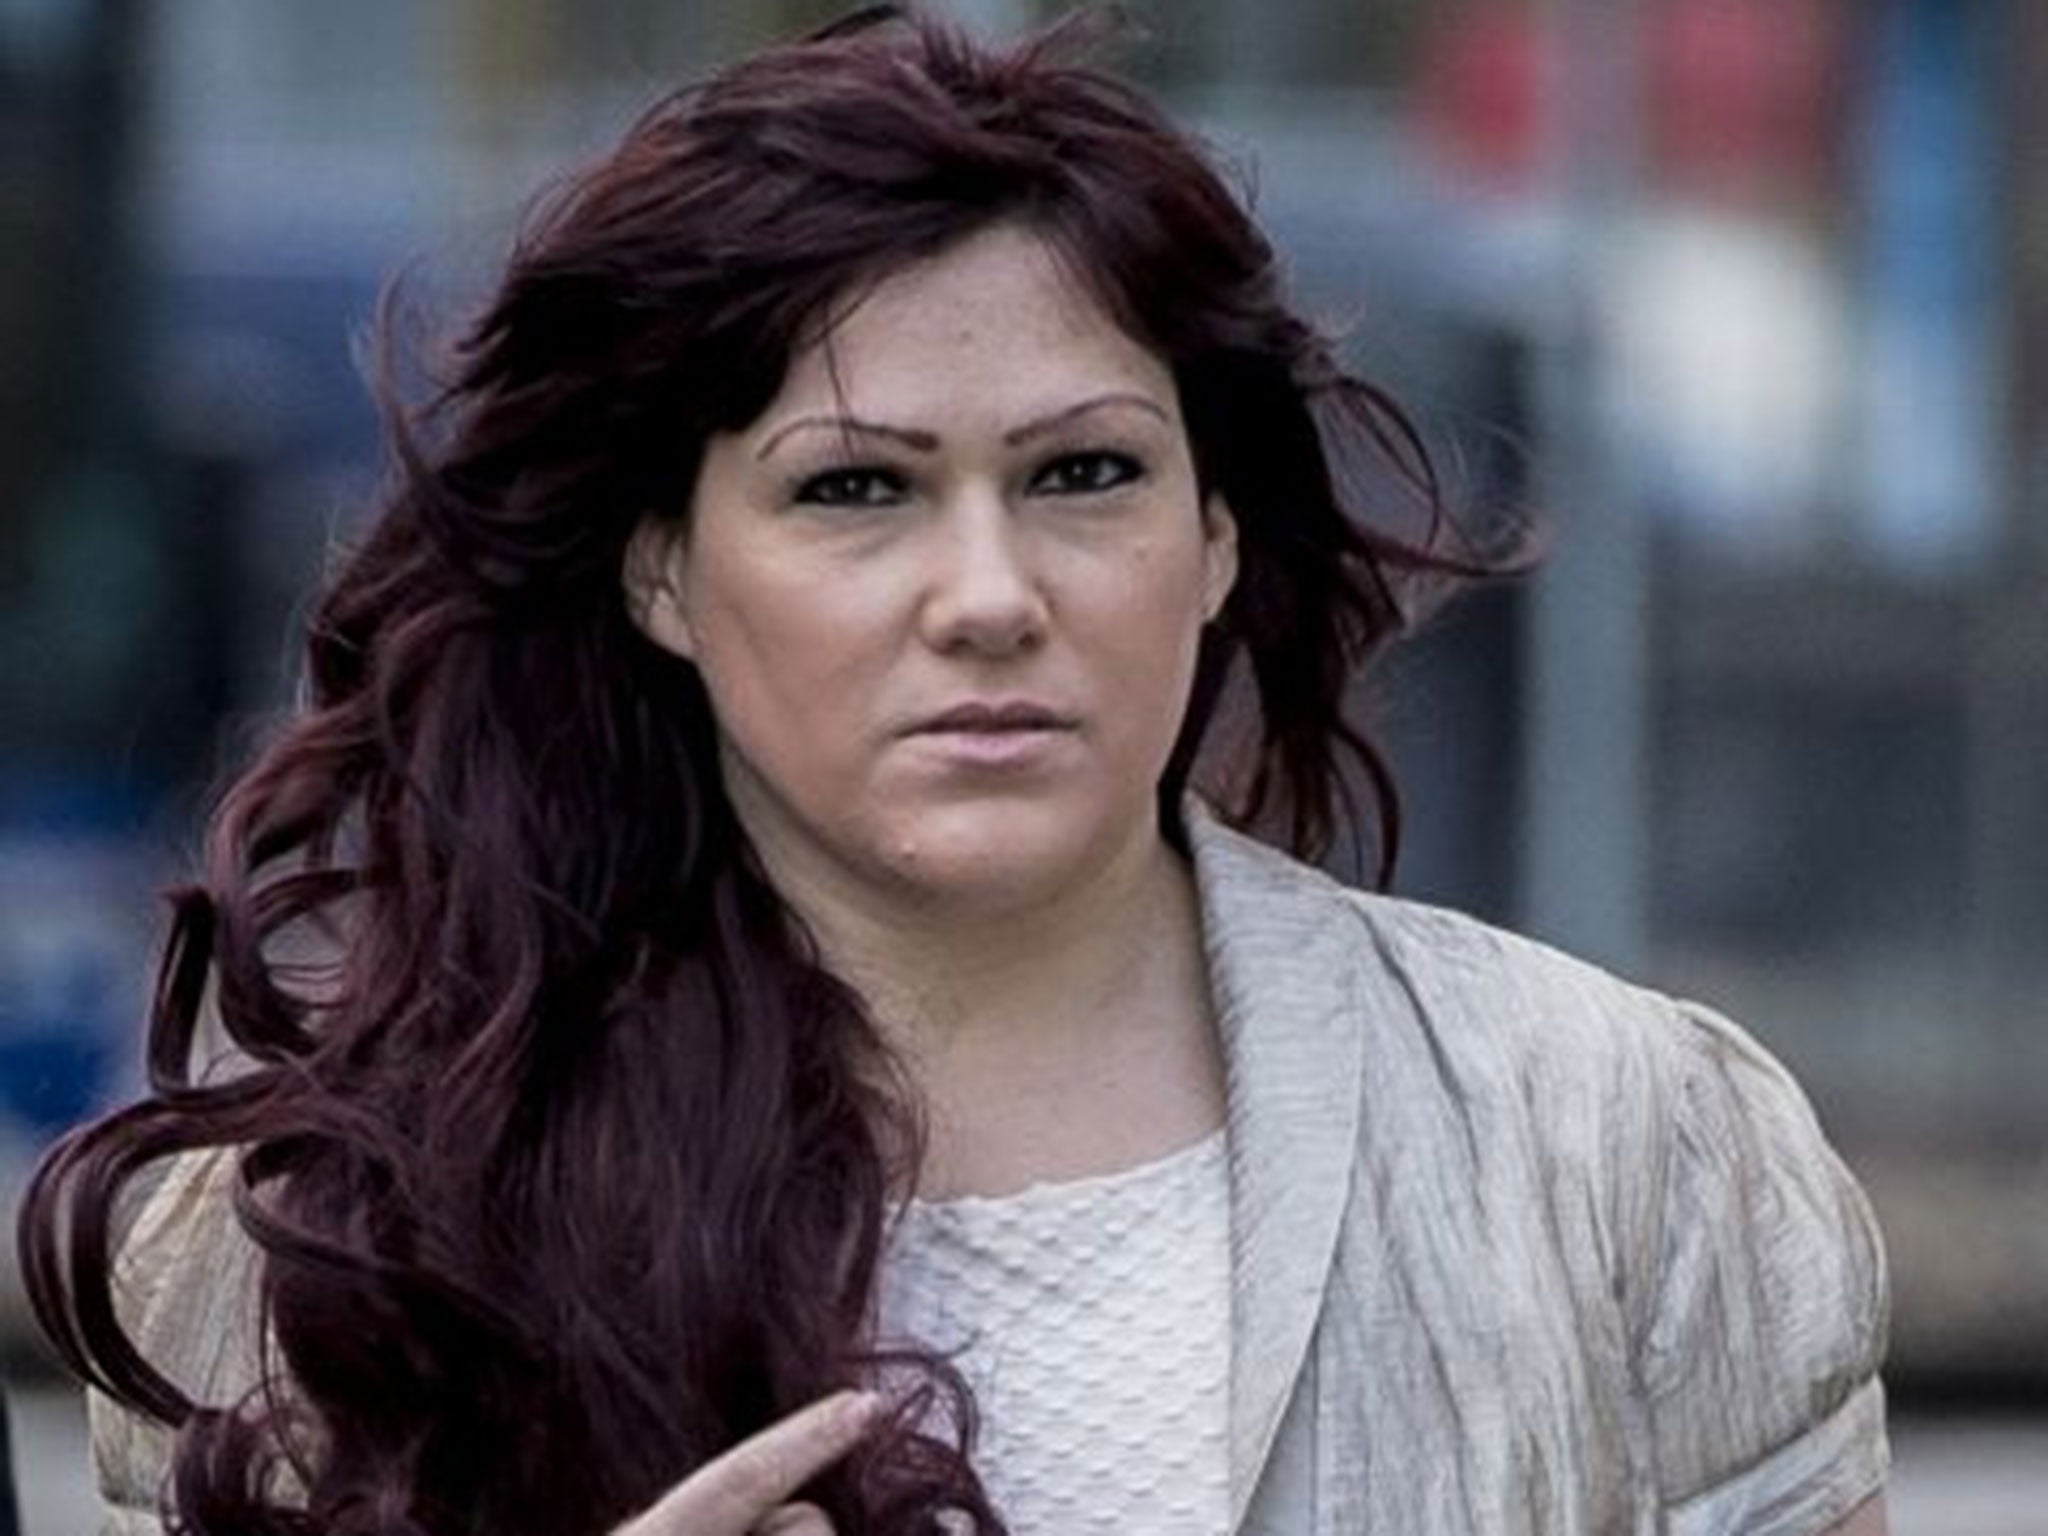 Joanne Mjadzelics, 39, the former girlfriend of paedophile rocker Ian Watkins, has been cleared of indecent images charges at Cardiff Crown Court.